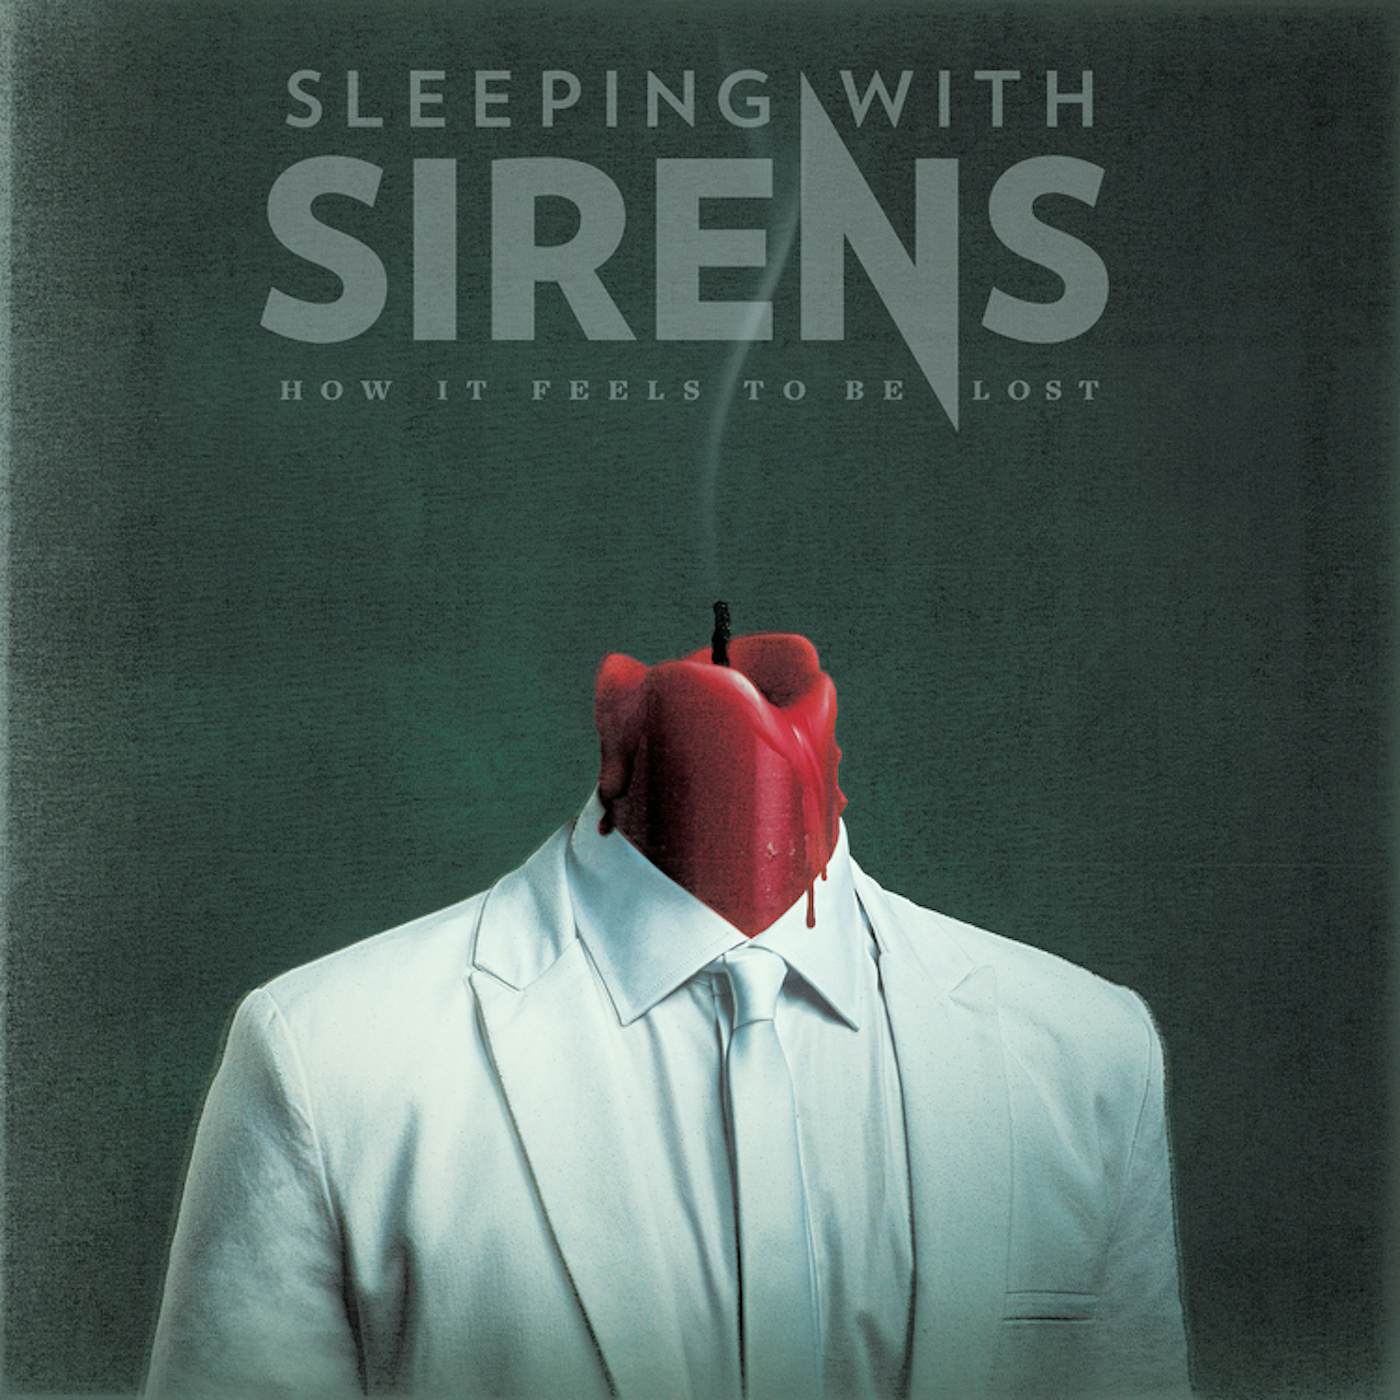 Sleeping With Sirens HOW IT FEELS TO BE LOST Vinyl Record